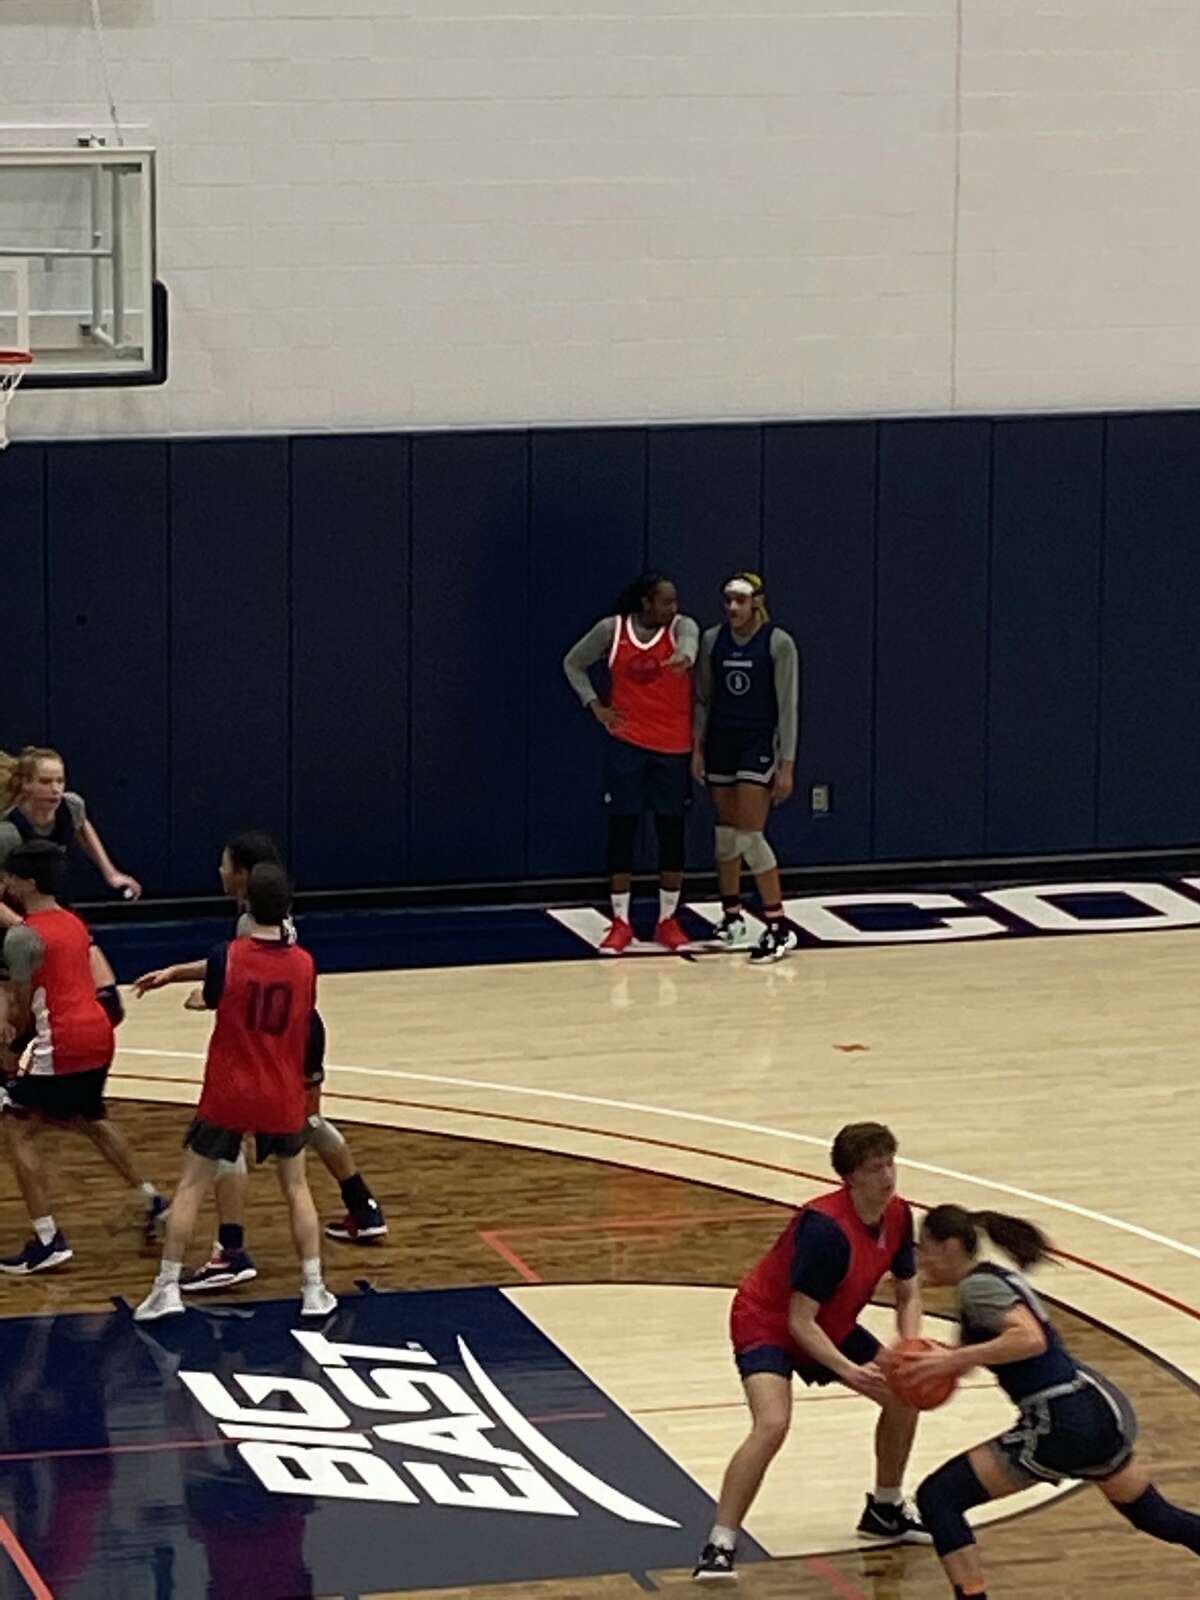 Former UConn women's basketball legend Tina Charles participated in the team's practice both on Friday and Saturday. She took time to talk to current forward Aaliyah Edwards.